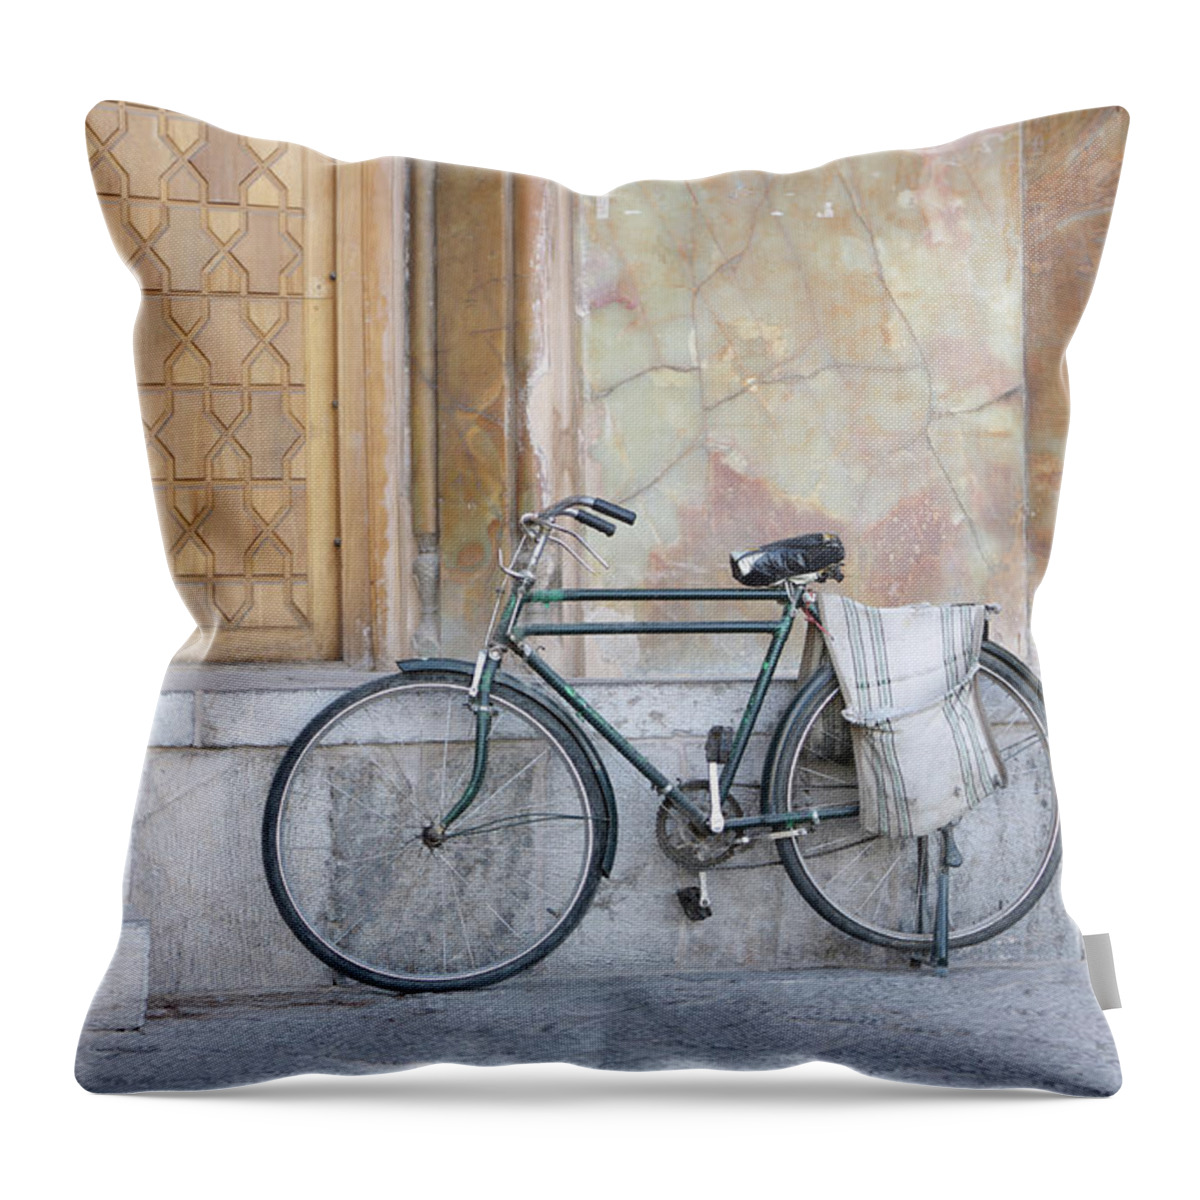 Tranquility Throw Pillow featuring the photograph Bicycle Outside The Imam Mosque by 717images By Paul Wood